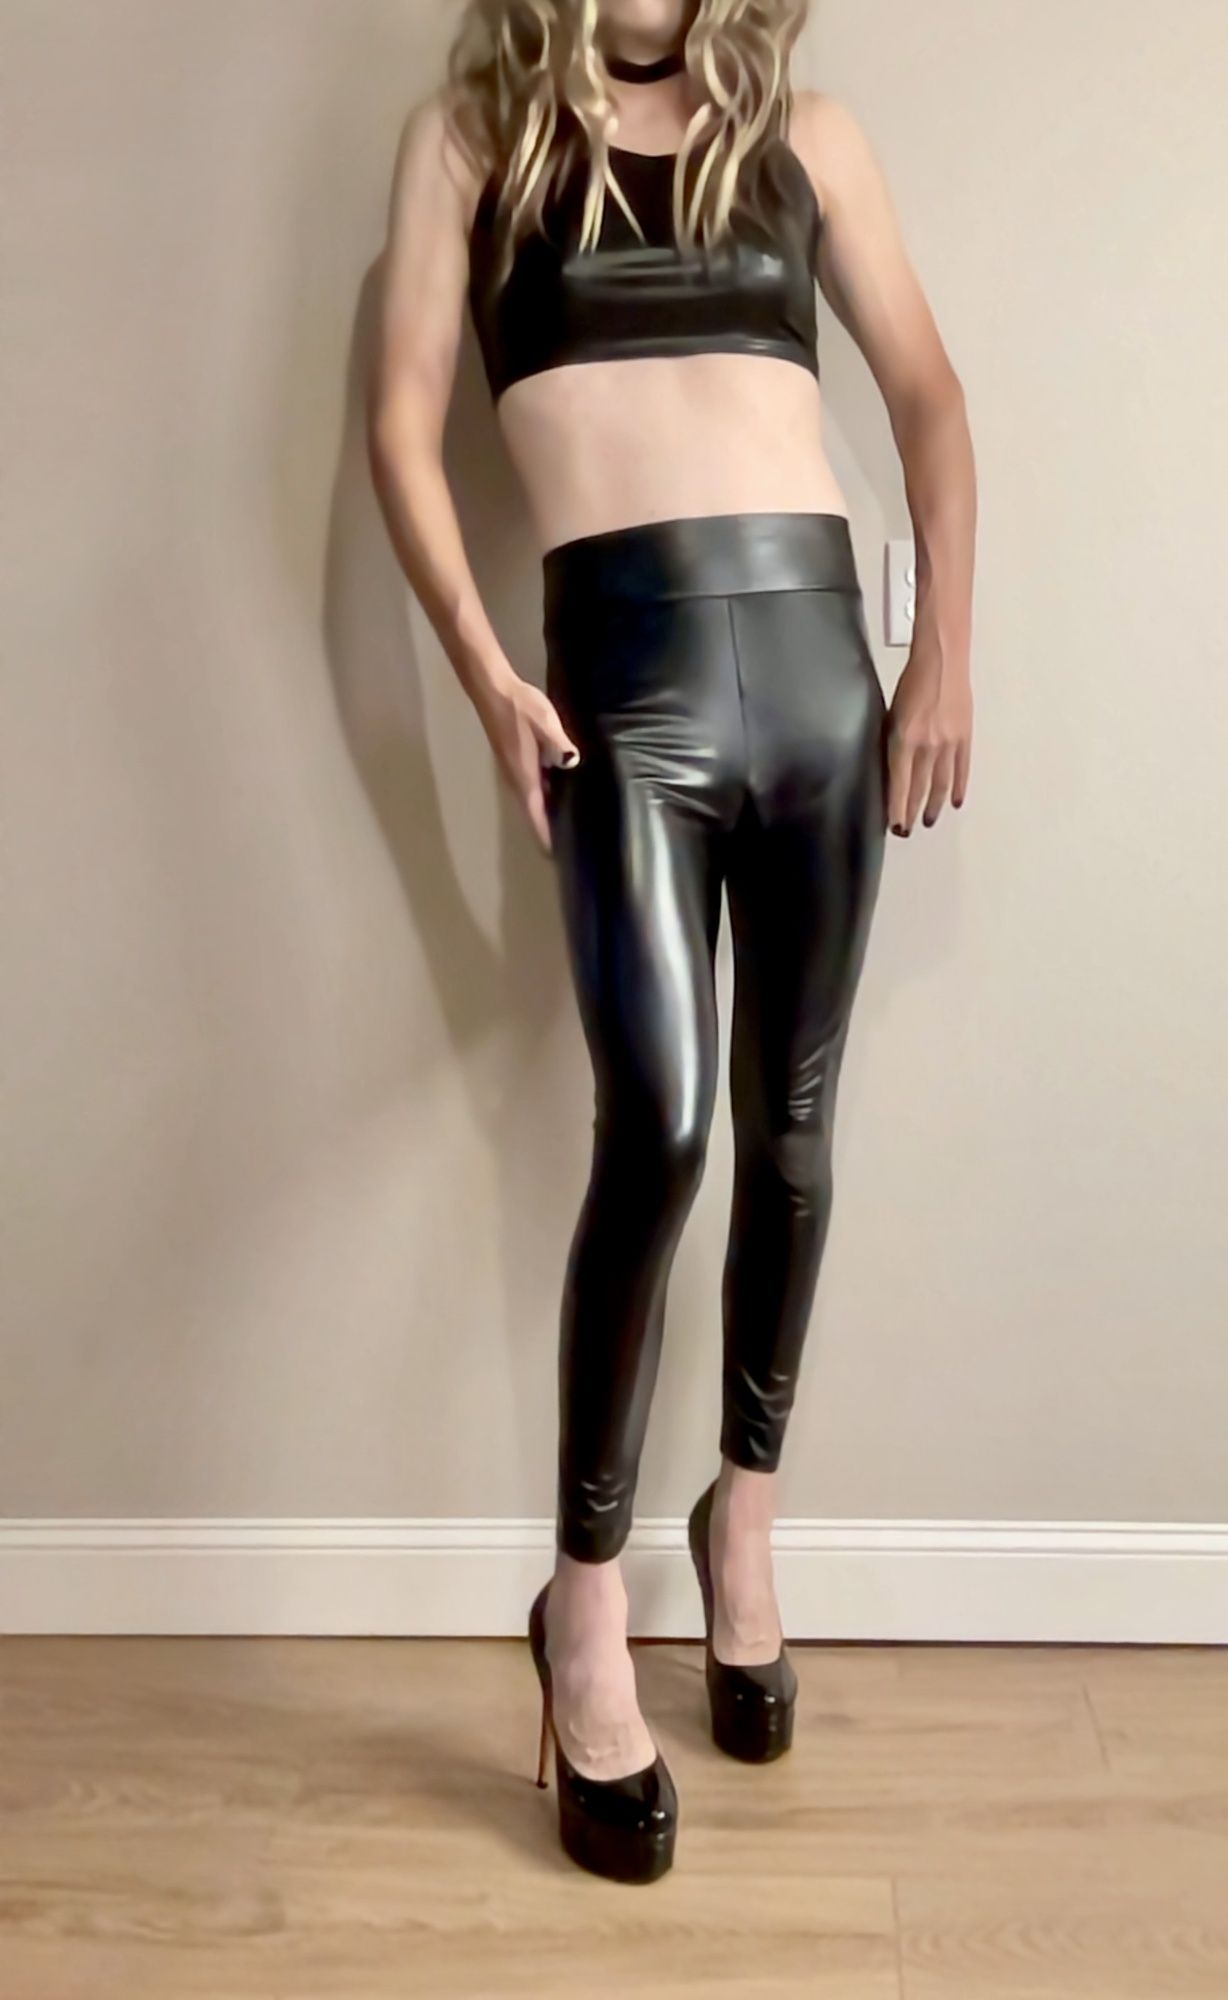 Black and tight #4